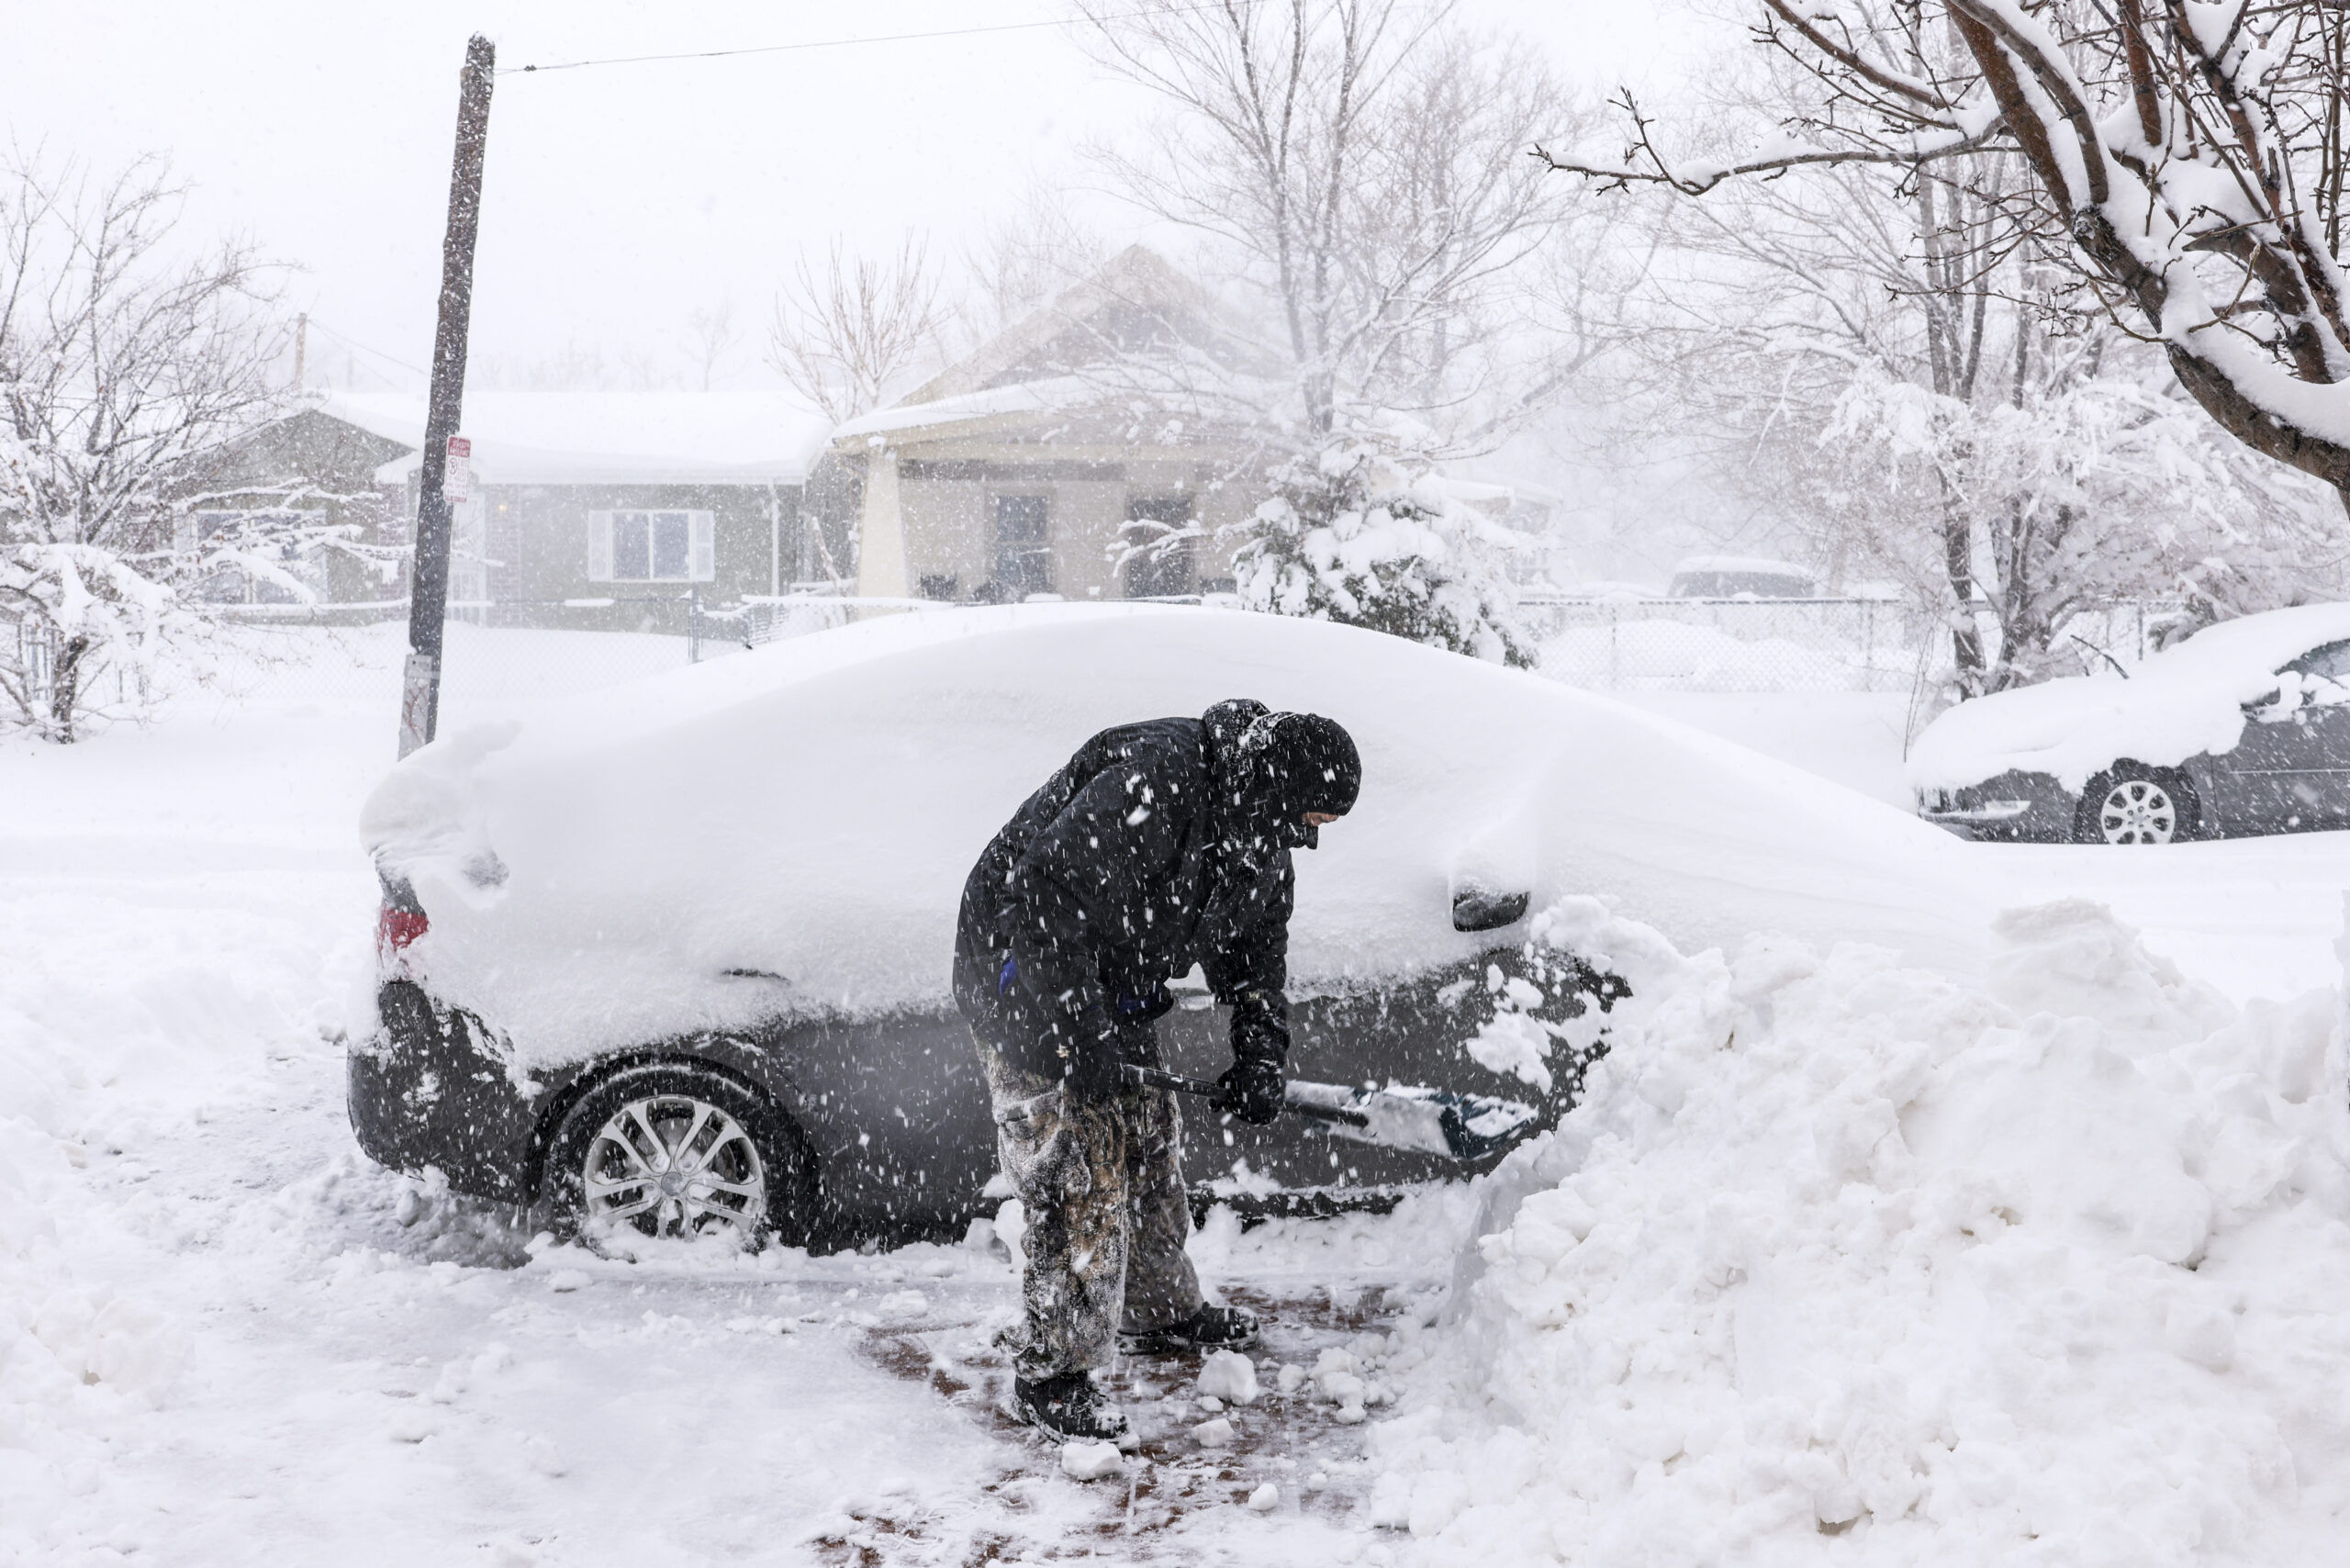 DENVER, CO - MARCH 14: William Freeman shovels the sidewalk next to a car buried in snow on March 1...